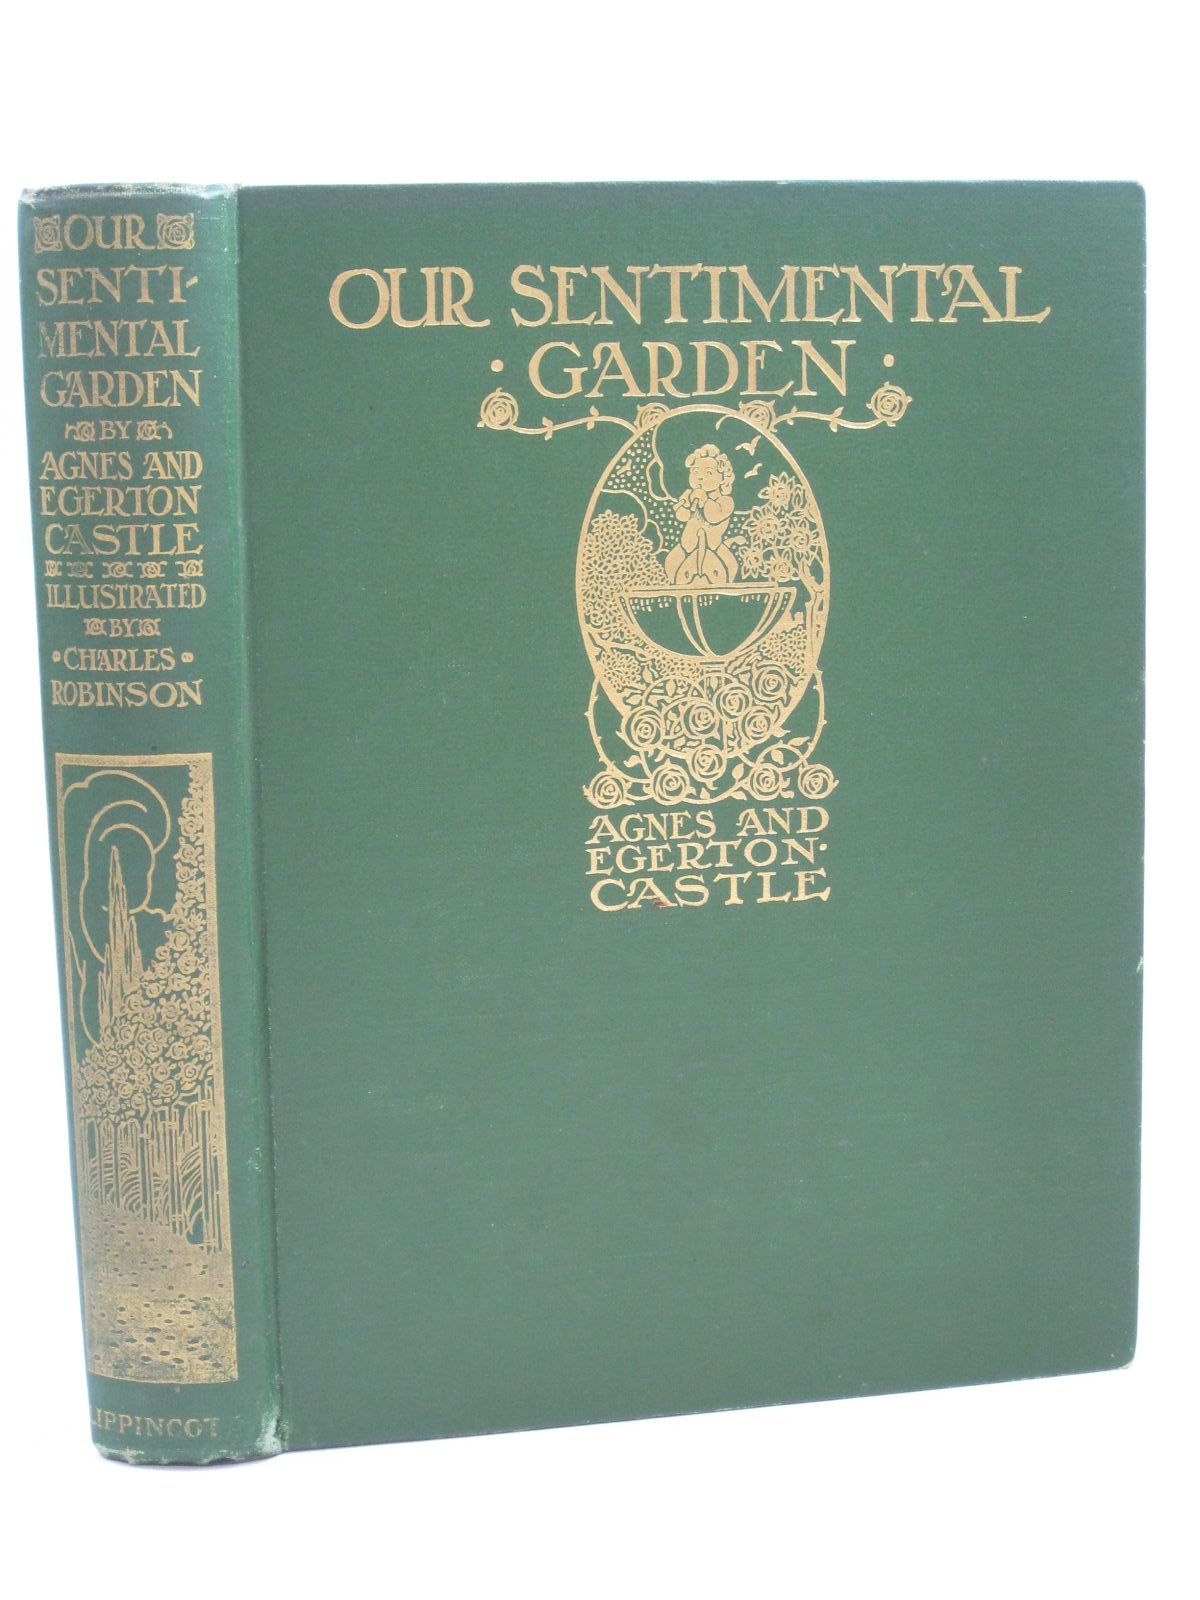 Photo of OUR SENTIMENTAL GARDEN written by Castle, Agnes Castle, Egerton illustrated by Robinson, Charles published by William Heinemann (STOCK CODE: 1404229)  for sale by Stella & Rose's Books